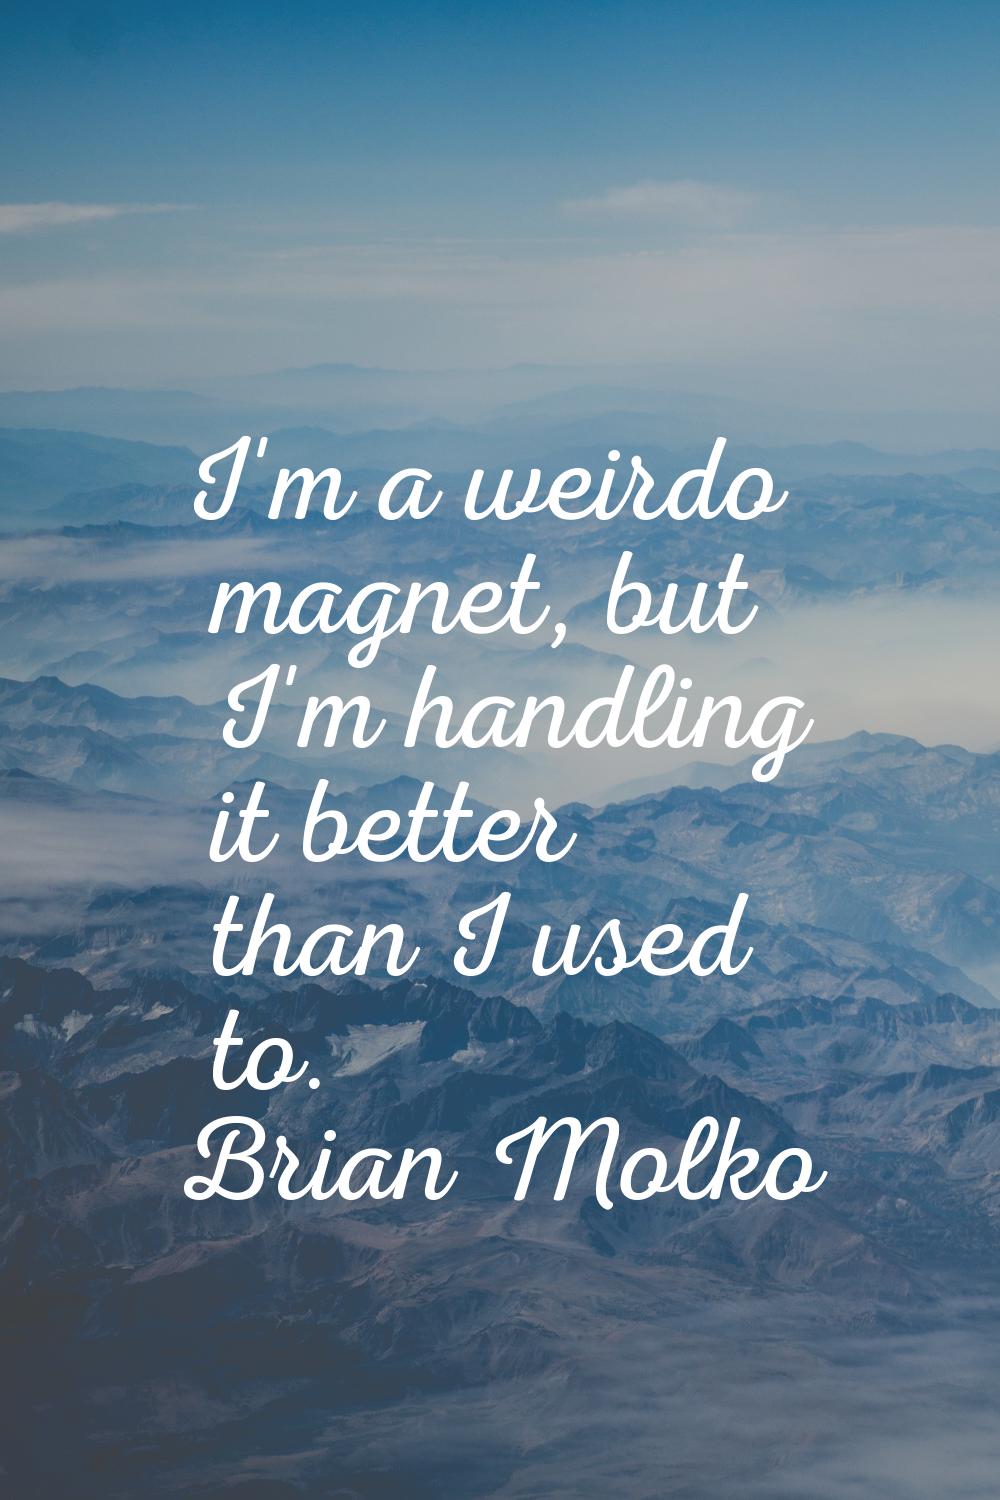 I'm a weirdo magnet, but I'm handling it better than I used to.